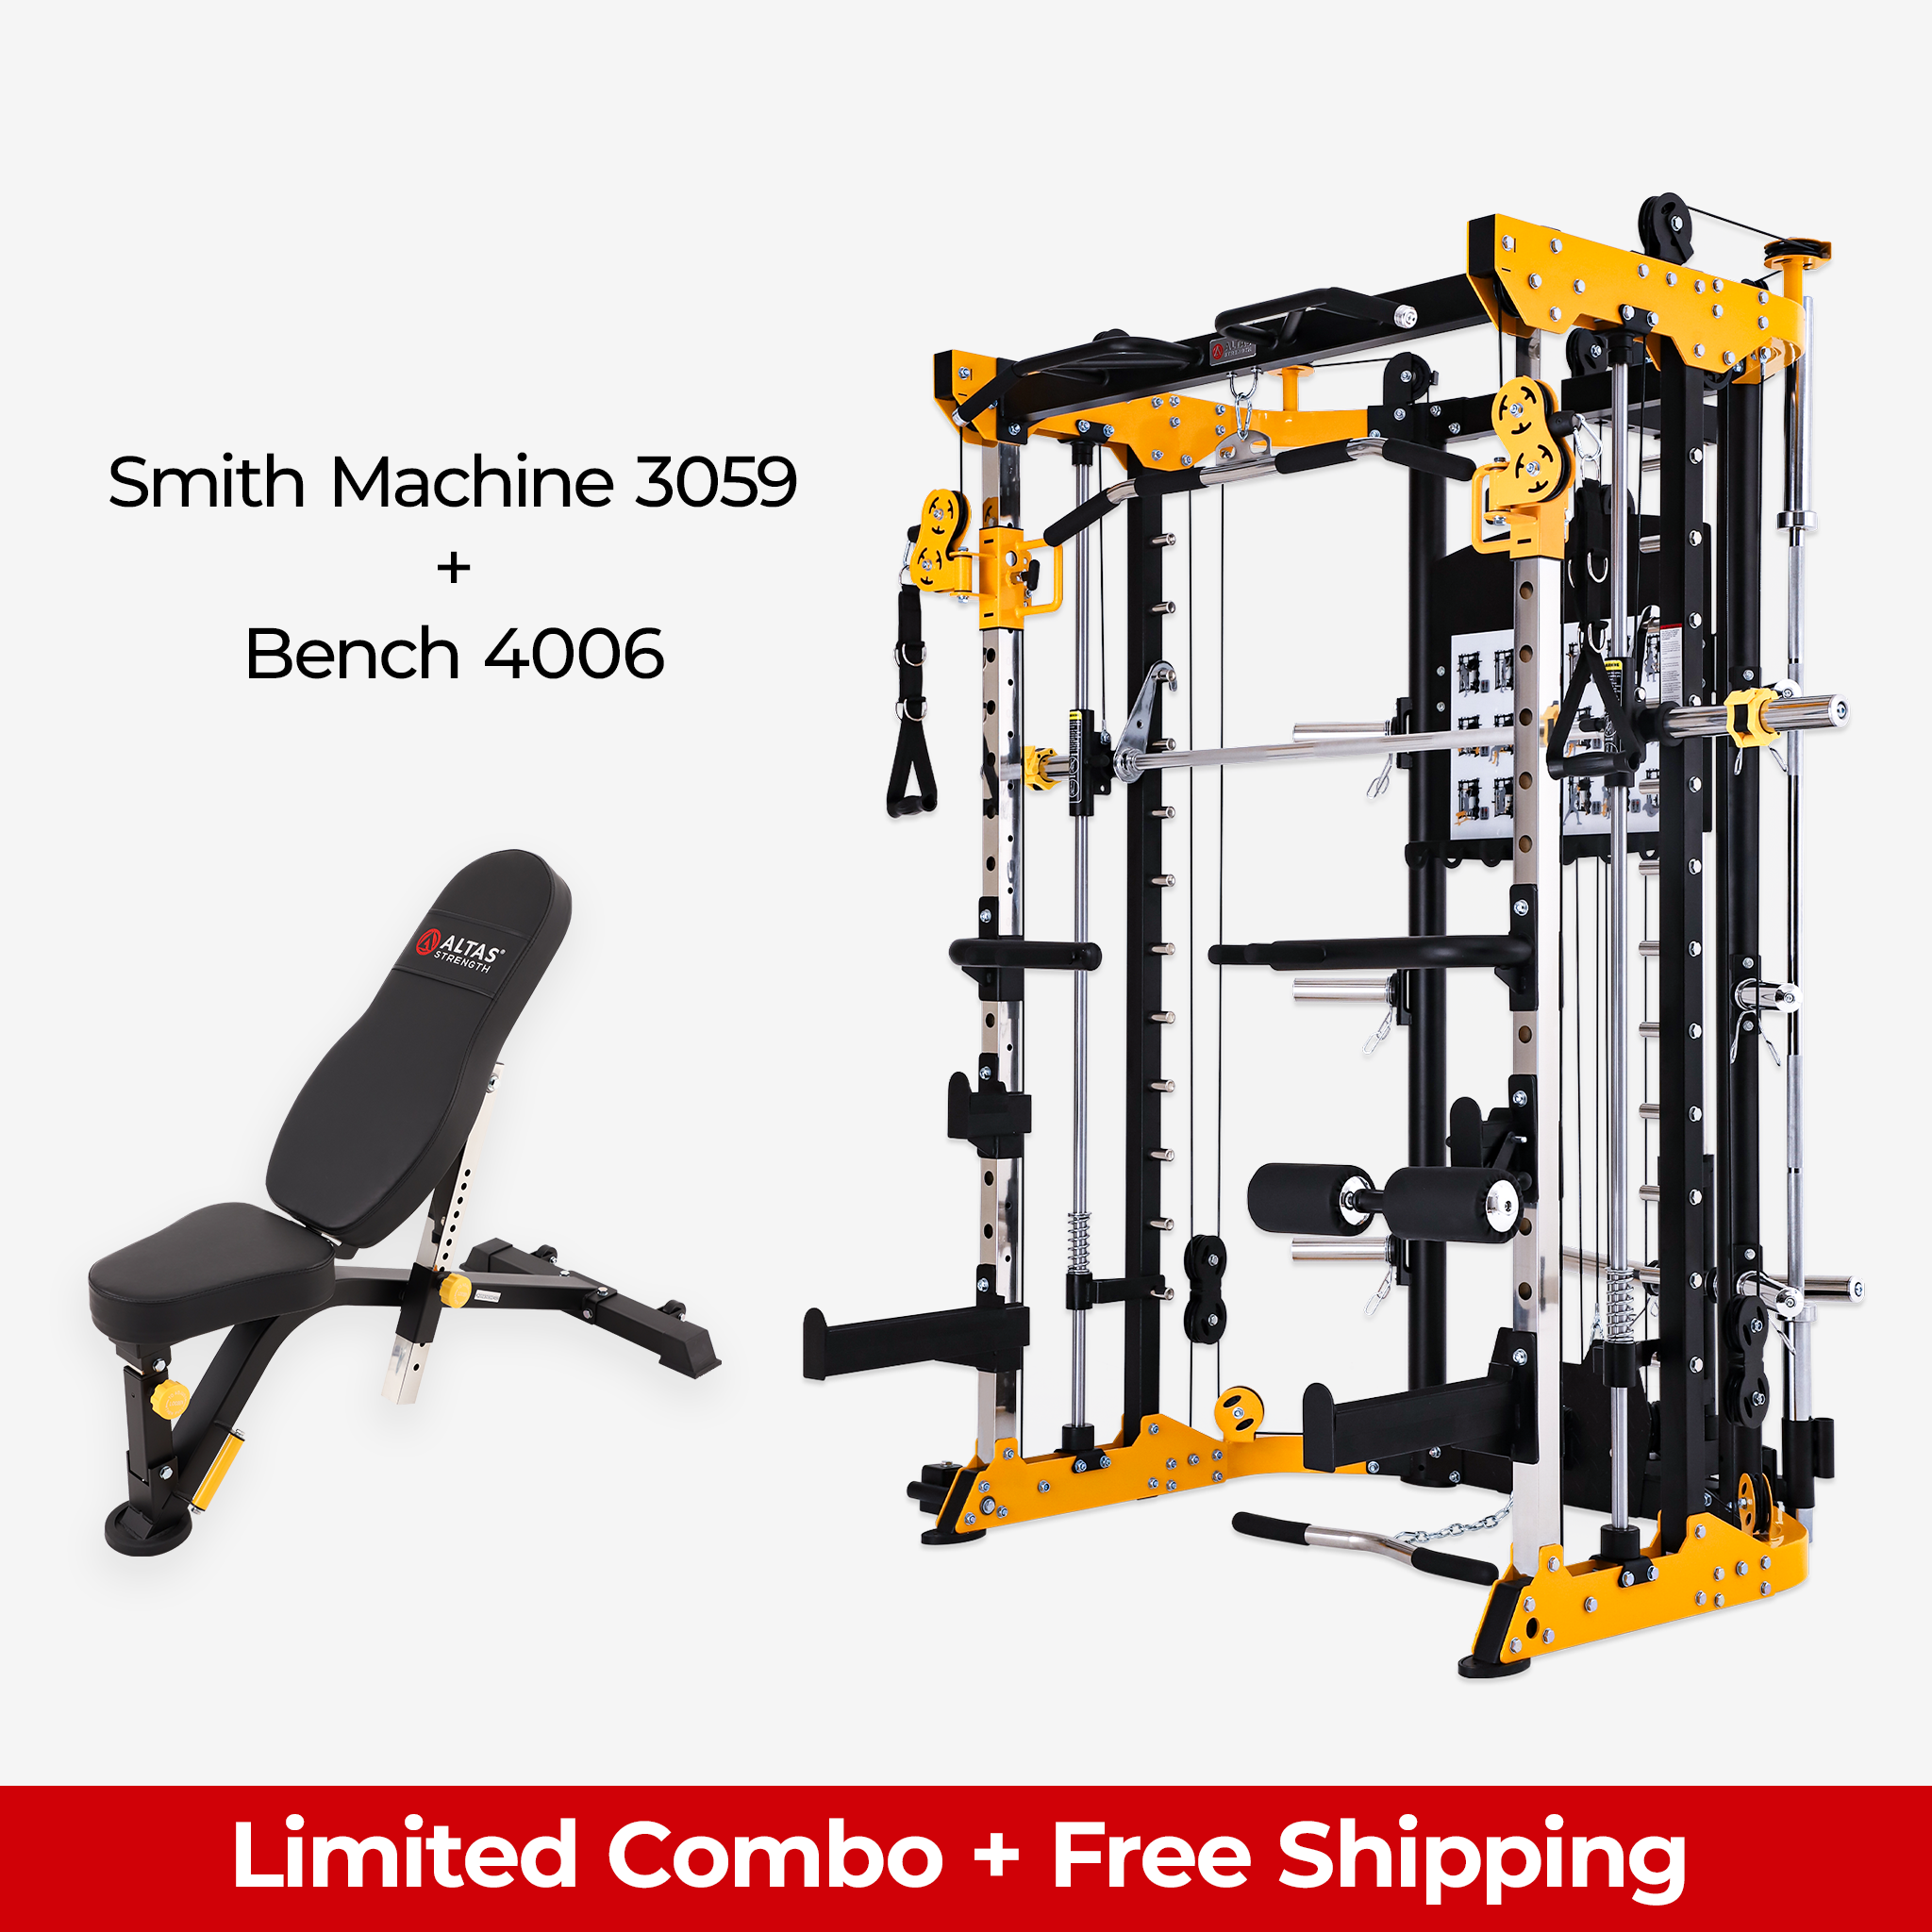 Limited Combo - Smith Machine AL-3059 + Bench 4006